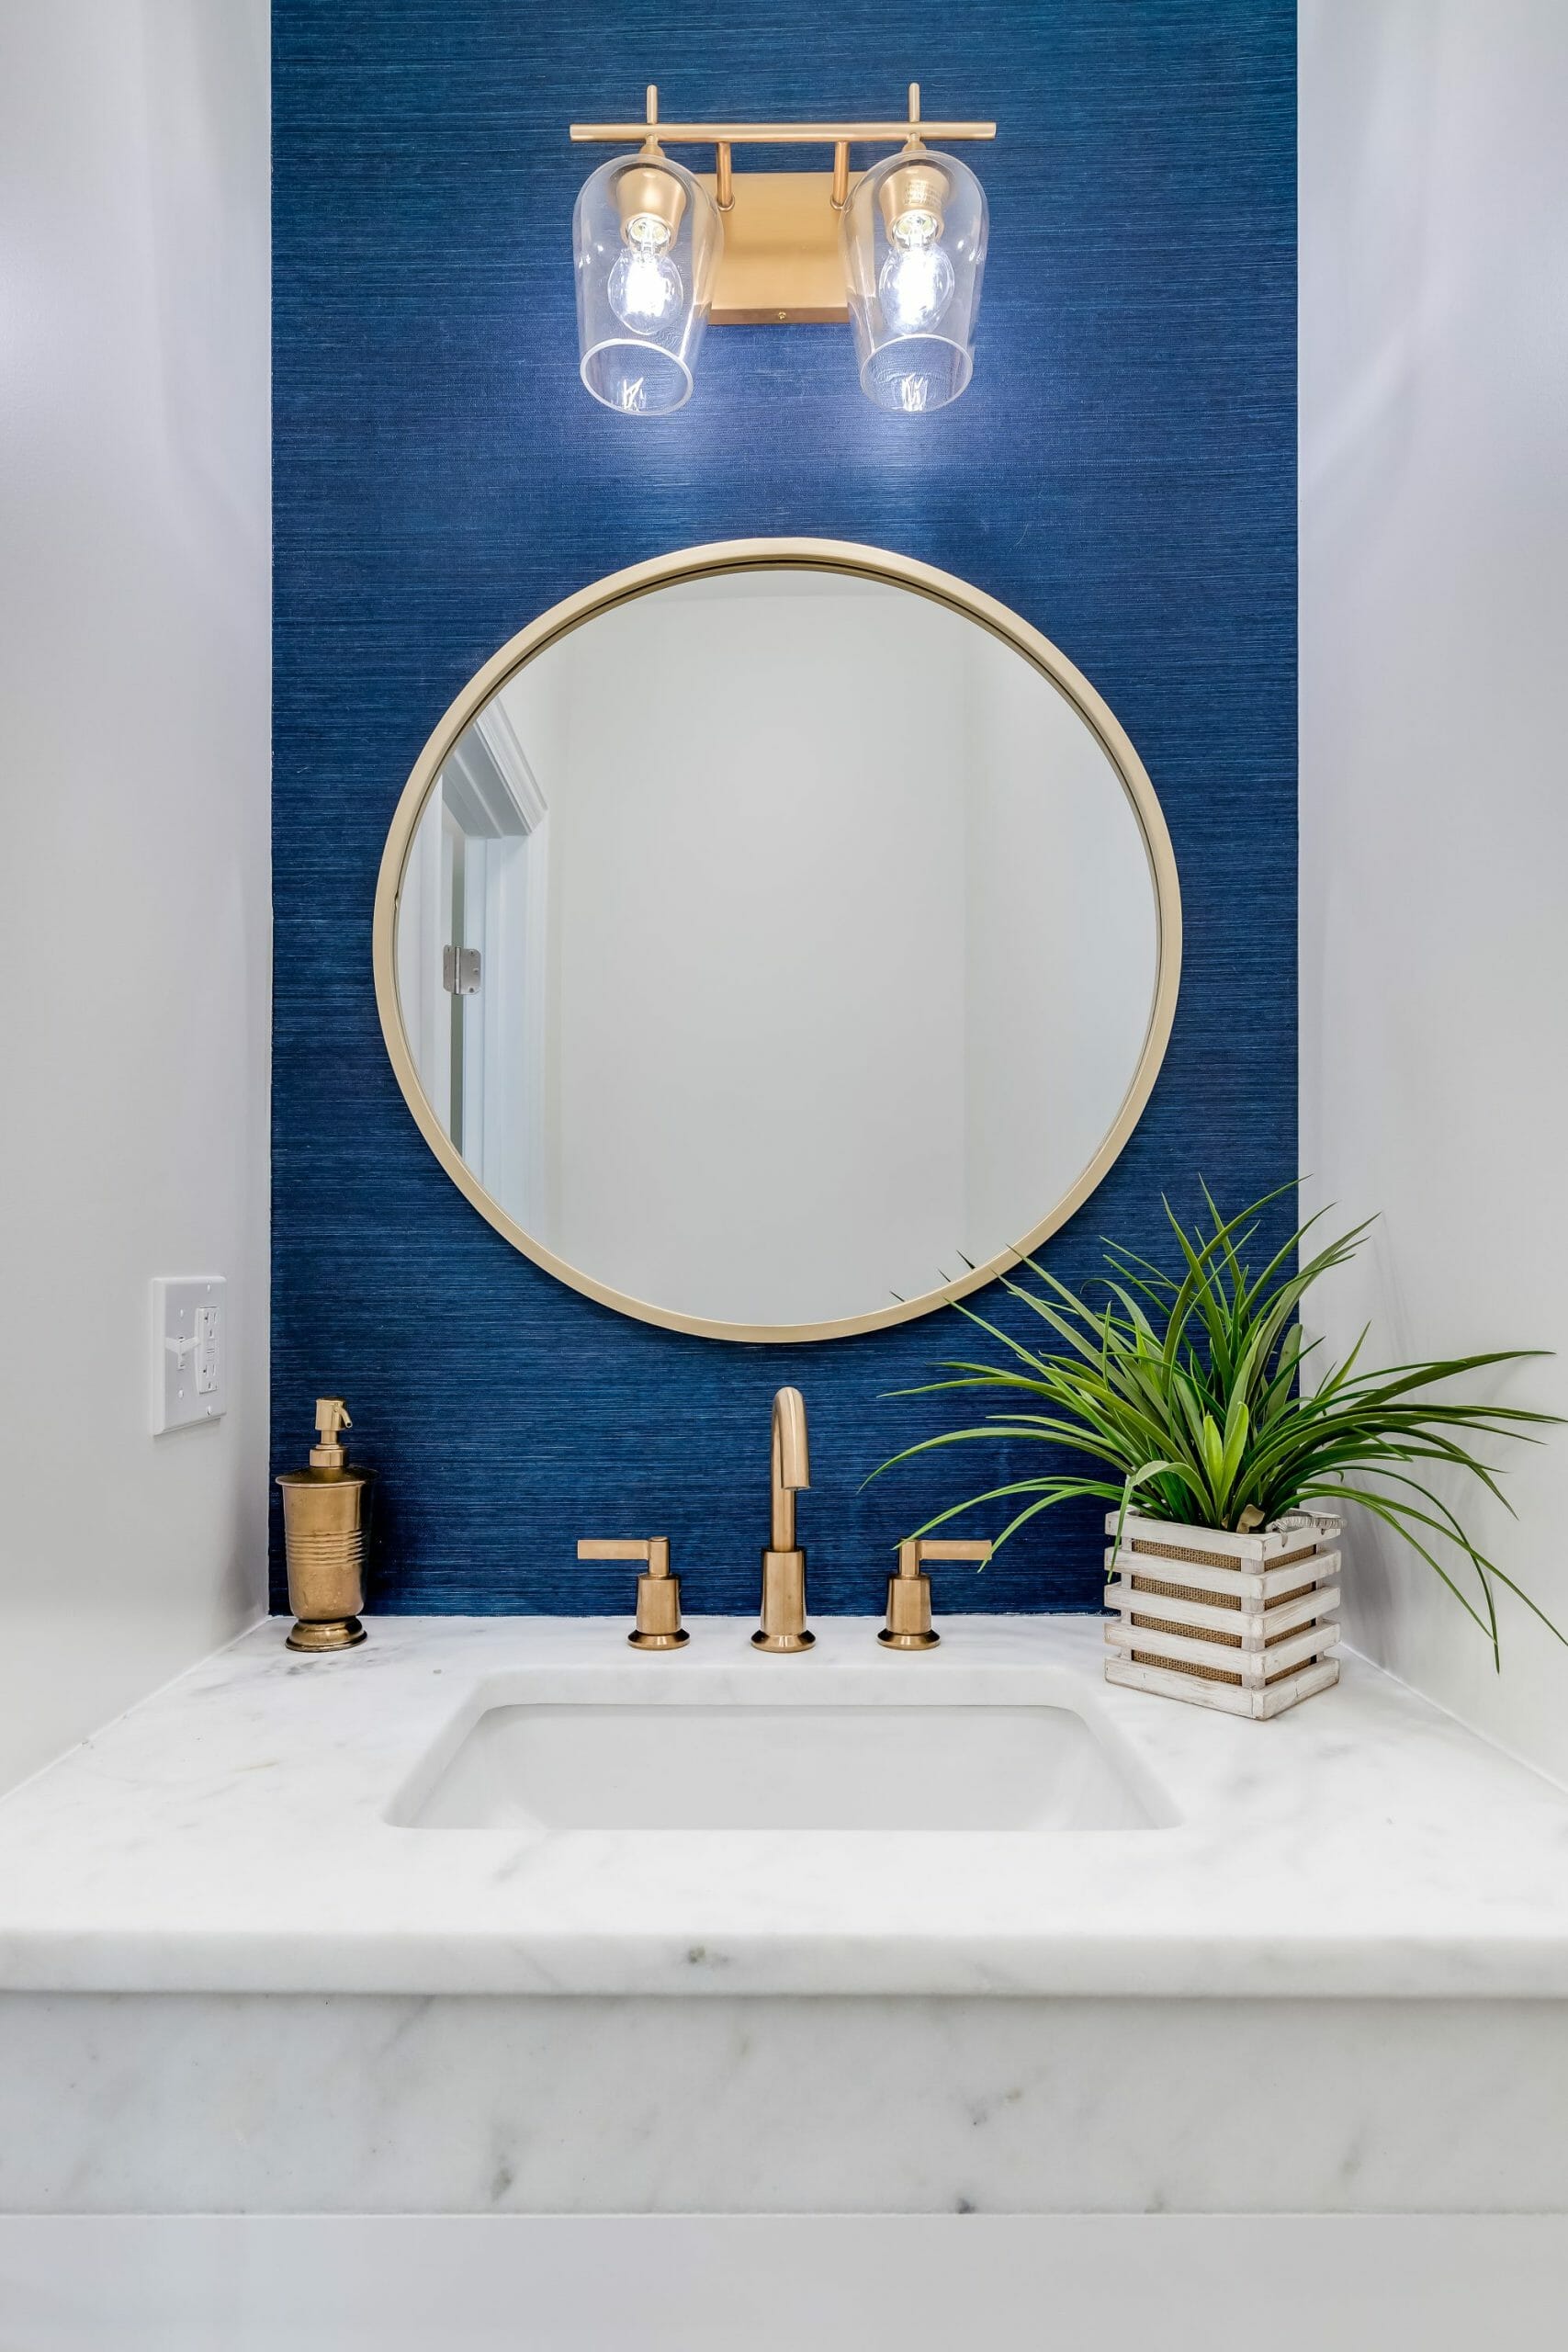 5 Tips to Make your Bathroom Look Bigger